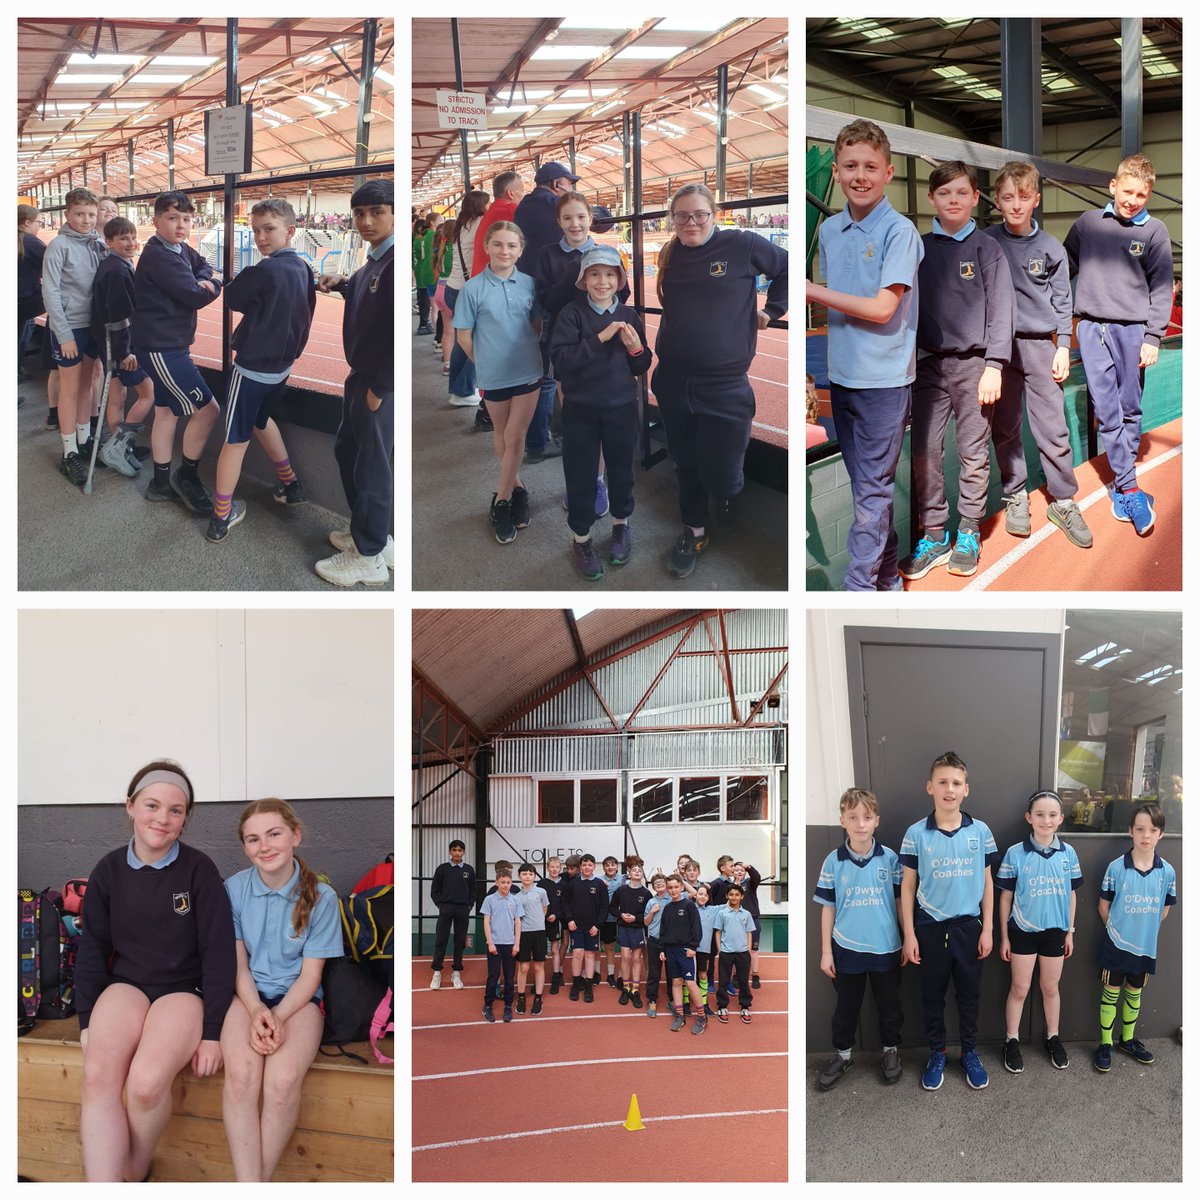 Another great day out at the Tipperary Primary Schools indoor athletics at @nenagholyac @irishathletics . Well done to all organisers, participants and our medallists.